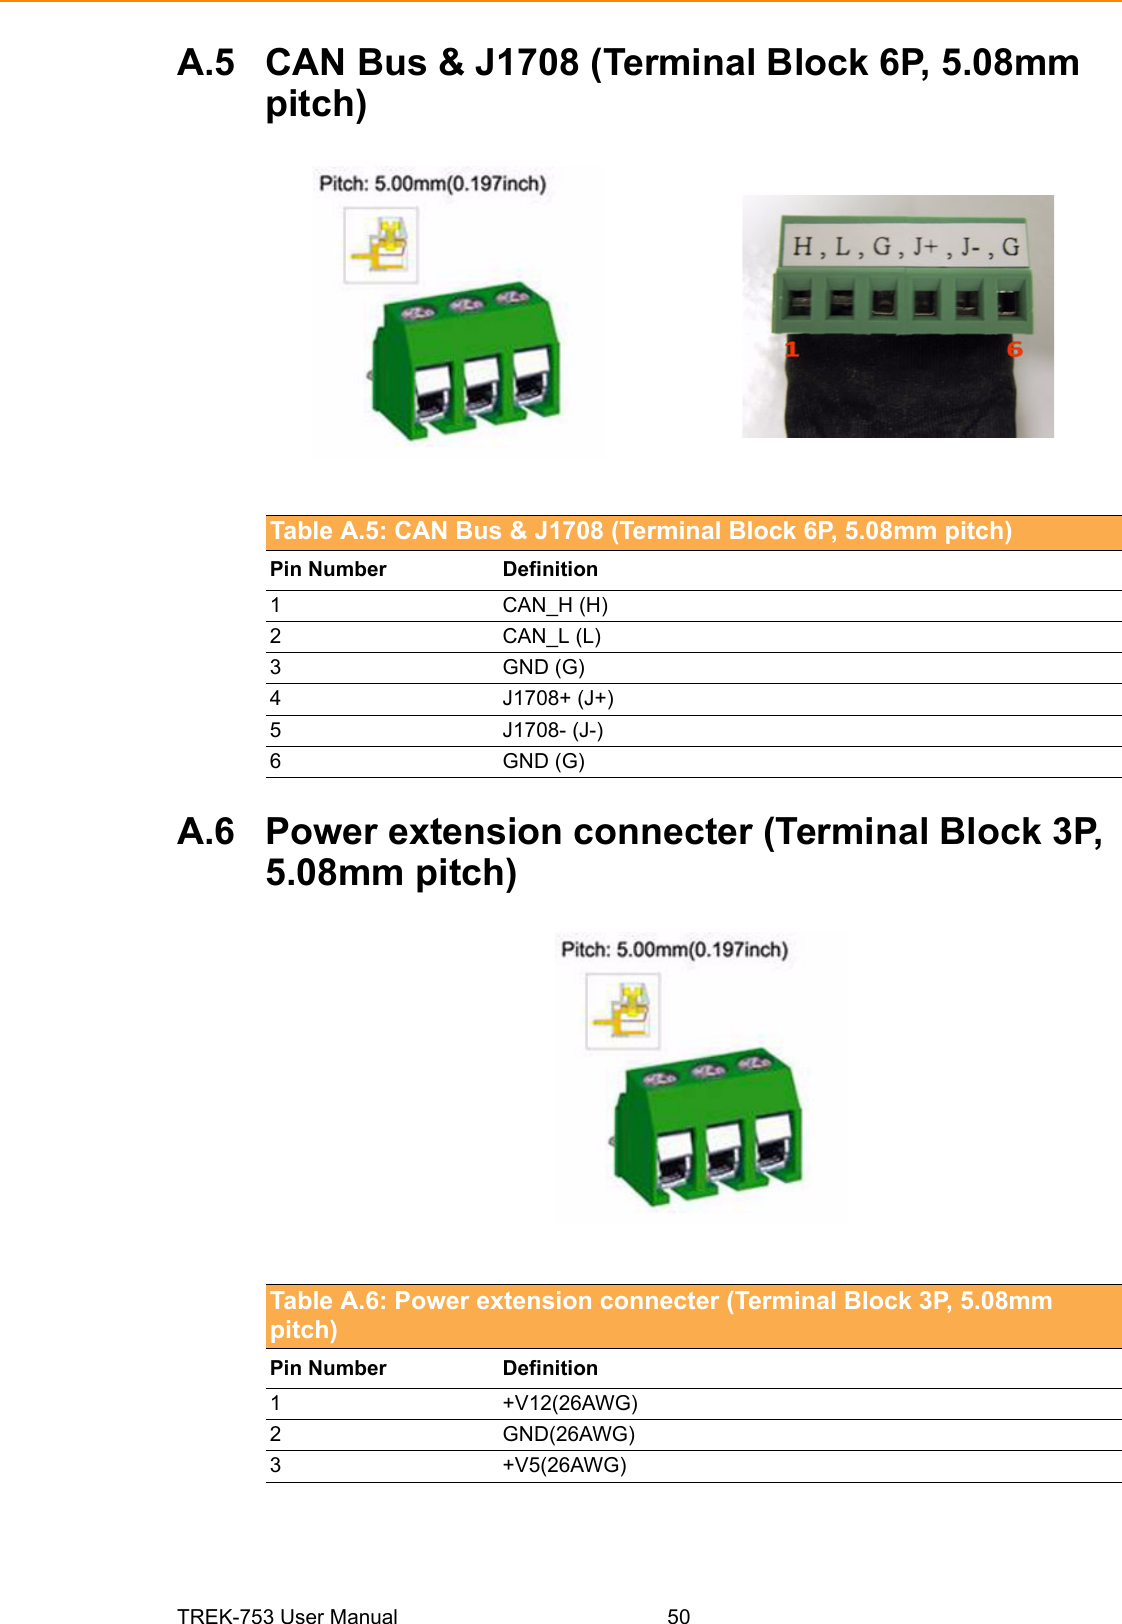 TREK-753 User Manual 50A.5 CAN Bus &amp; J1708 (Terminal Block 6P, 5.08mm pitch)A.6 Power extension connecter (Terminal Block 3P, 5.08mm pitch)Table A.5: CAN Bus &amp; J1708 (Terminal Block 6P, 5.08mm pitch)Pin Number  Definition1CAN_H (H)2CAN_L (L)3 GND (G)4 J1708+ (J+)5 J1708- (J-)6 GND (G)Table A.6: Power extension connecter (Terminal Block 3P, 5.08mm pitch)Pin Number  Definition1 +V12(26AWG)2 GND(26AWG)3 +V5(26AWG)